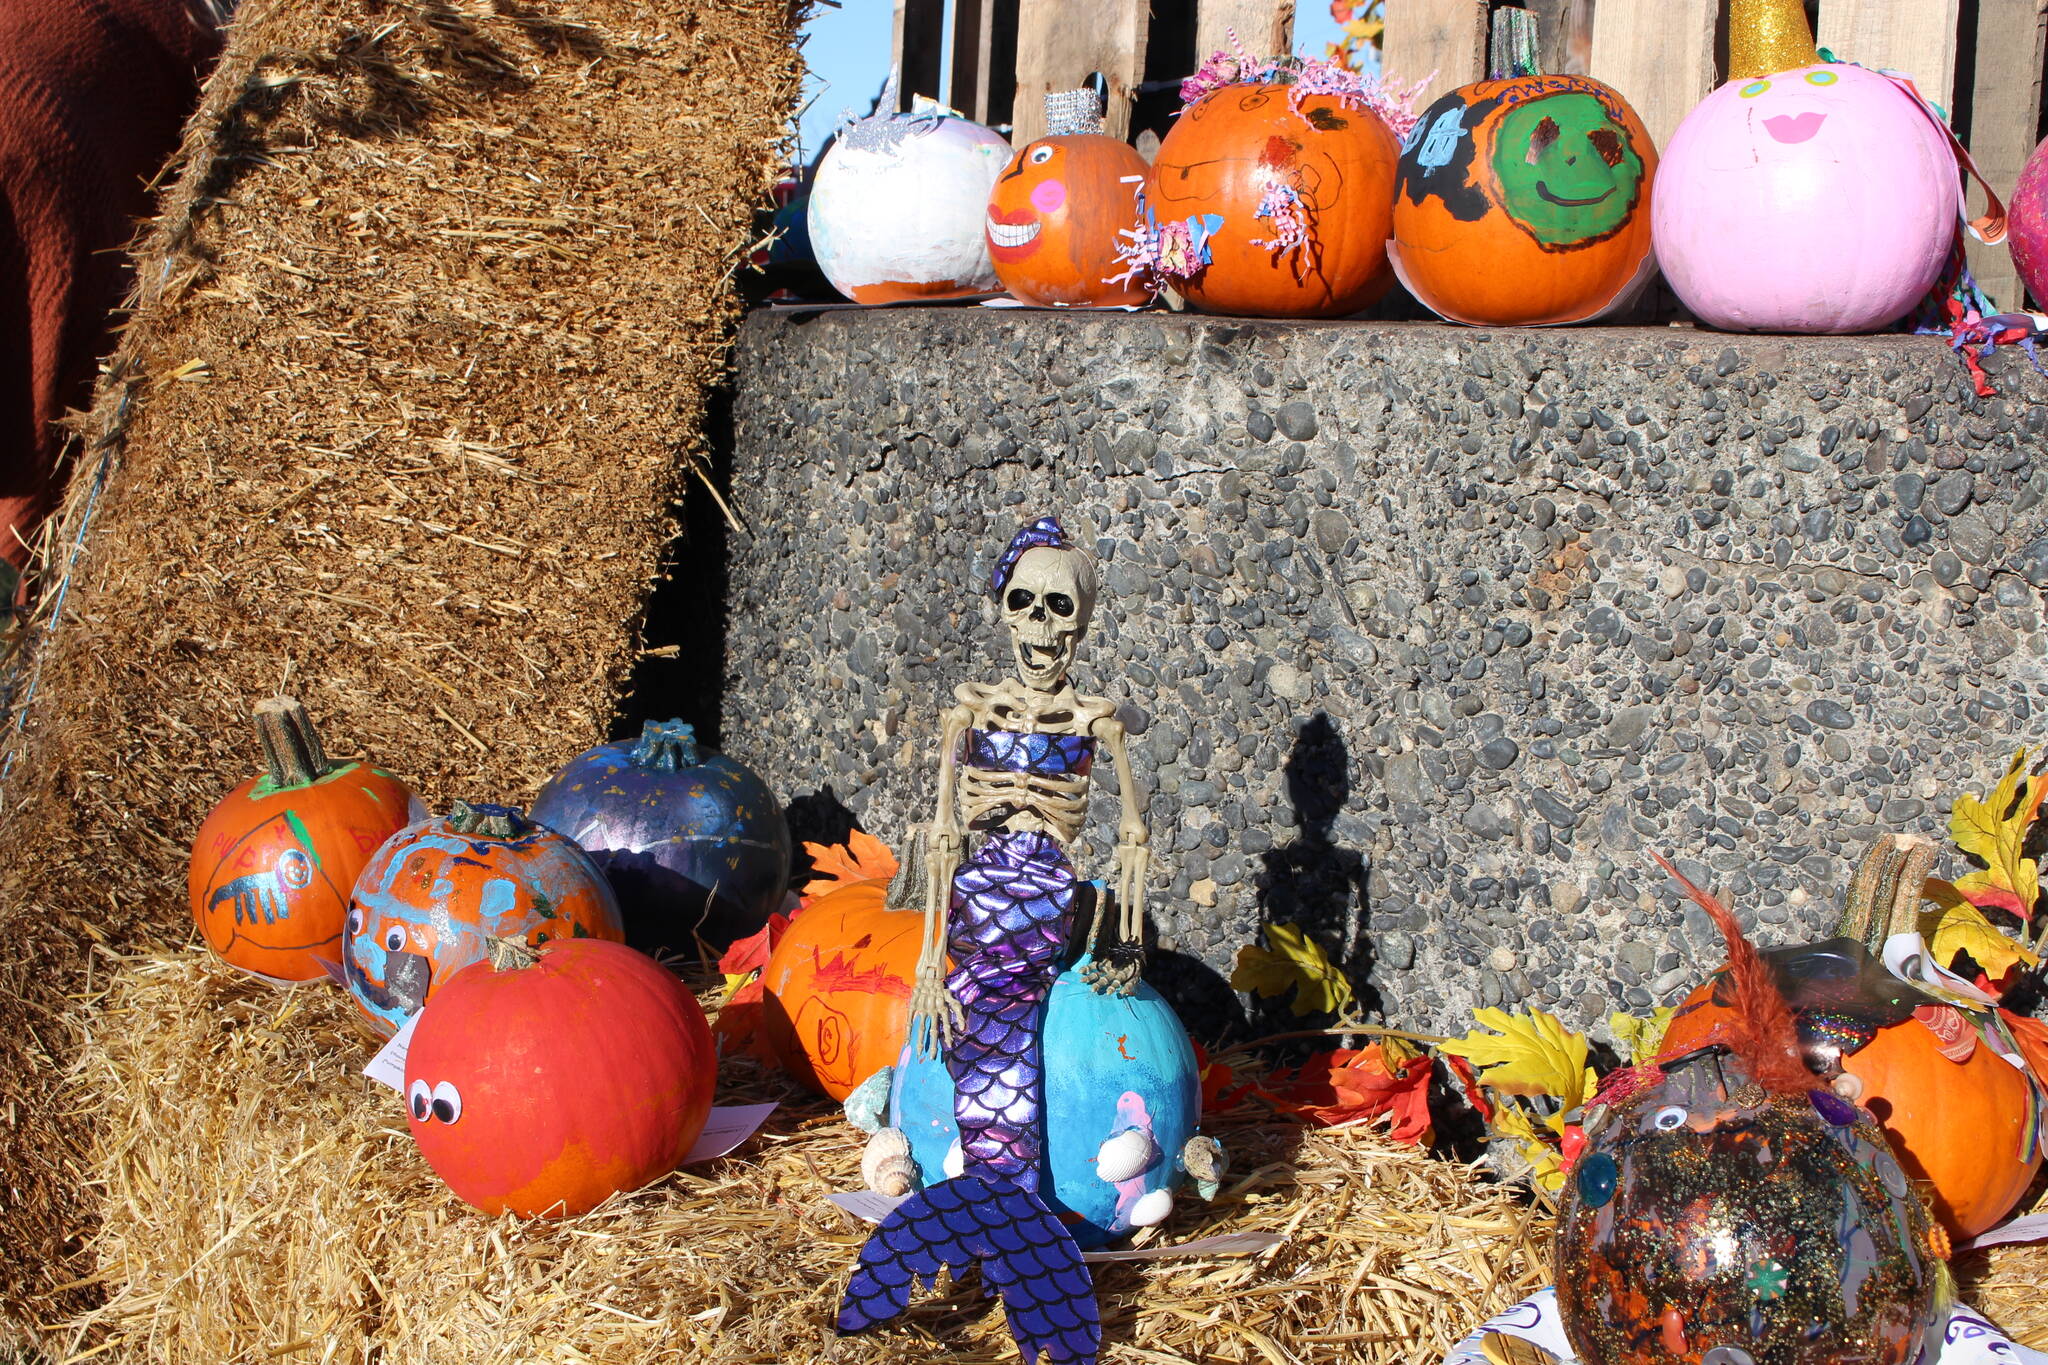 Some of the pumpkins submitted to the pumpkin decorating contest are seen here during the 5th annual Kenai Fall Pumpkin Festival in Kenai, Alaska on Oct. 10, 2020. (Peninsula Clarion file)